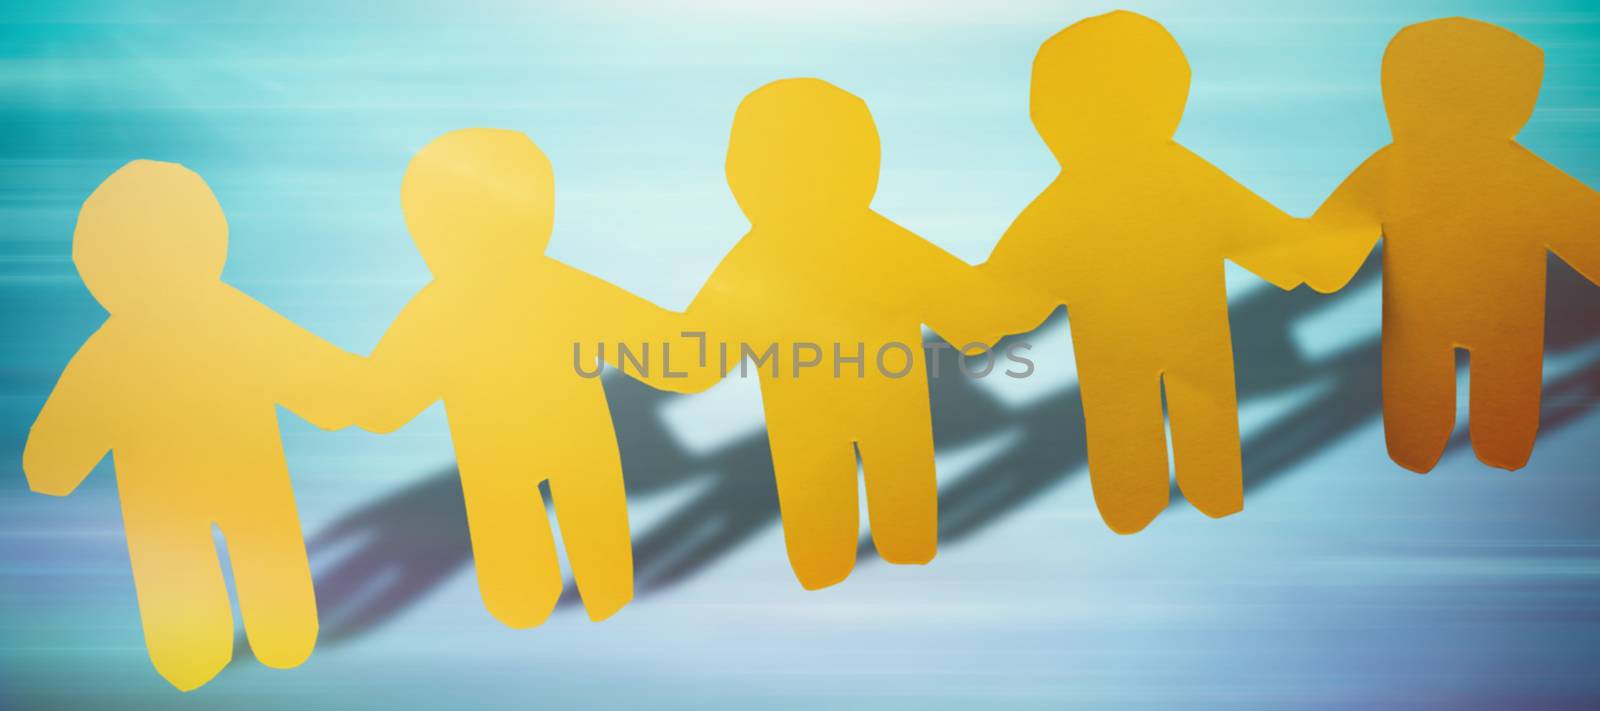 yellow hand holding paper against blue abstract image